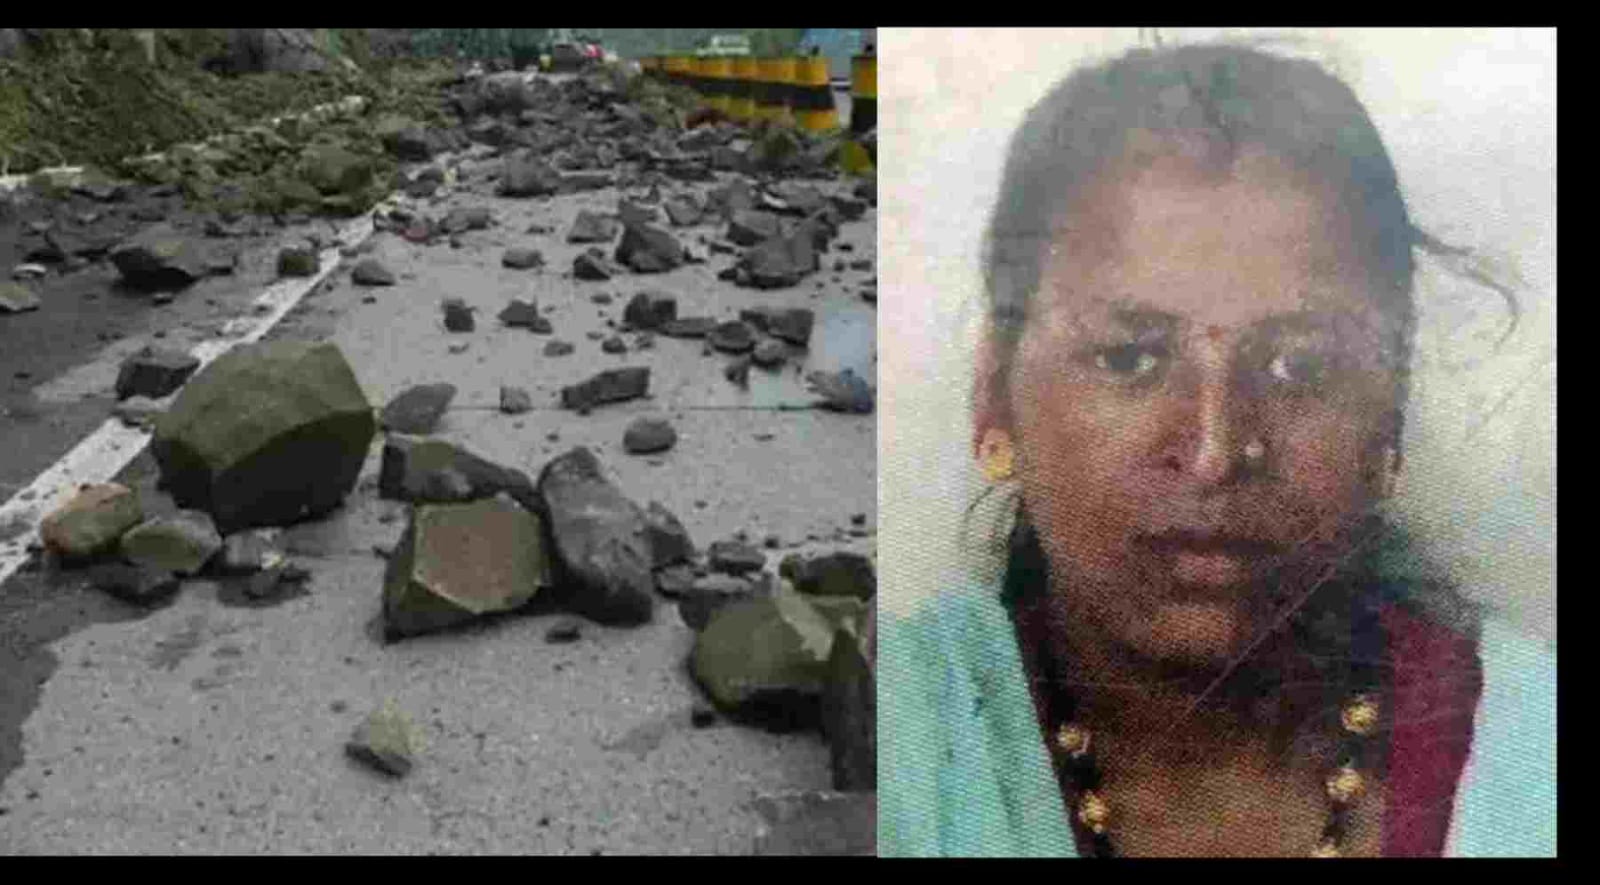 Uttarakhand news: kamla Dhami of Dharchula Pithoragarh dies after being hit by boulder.